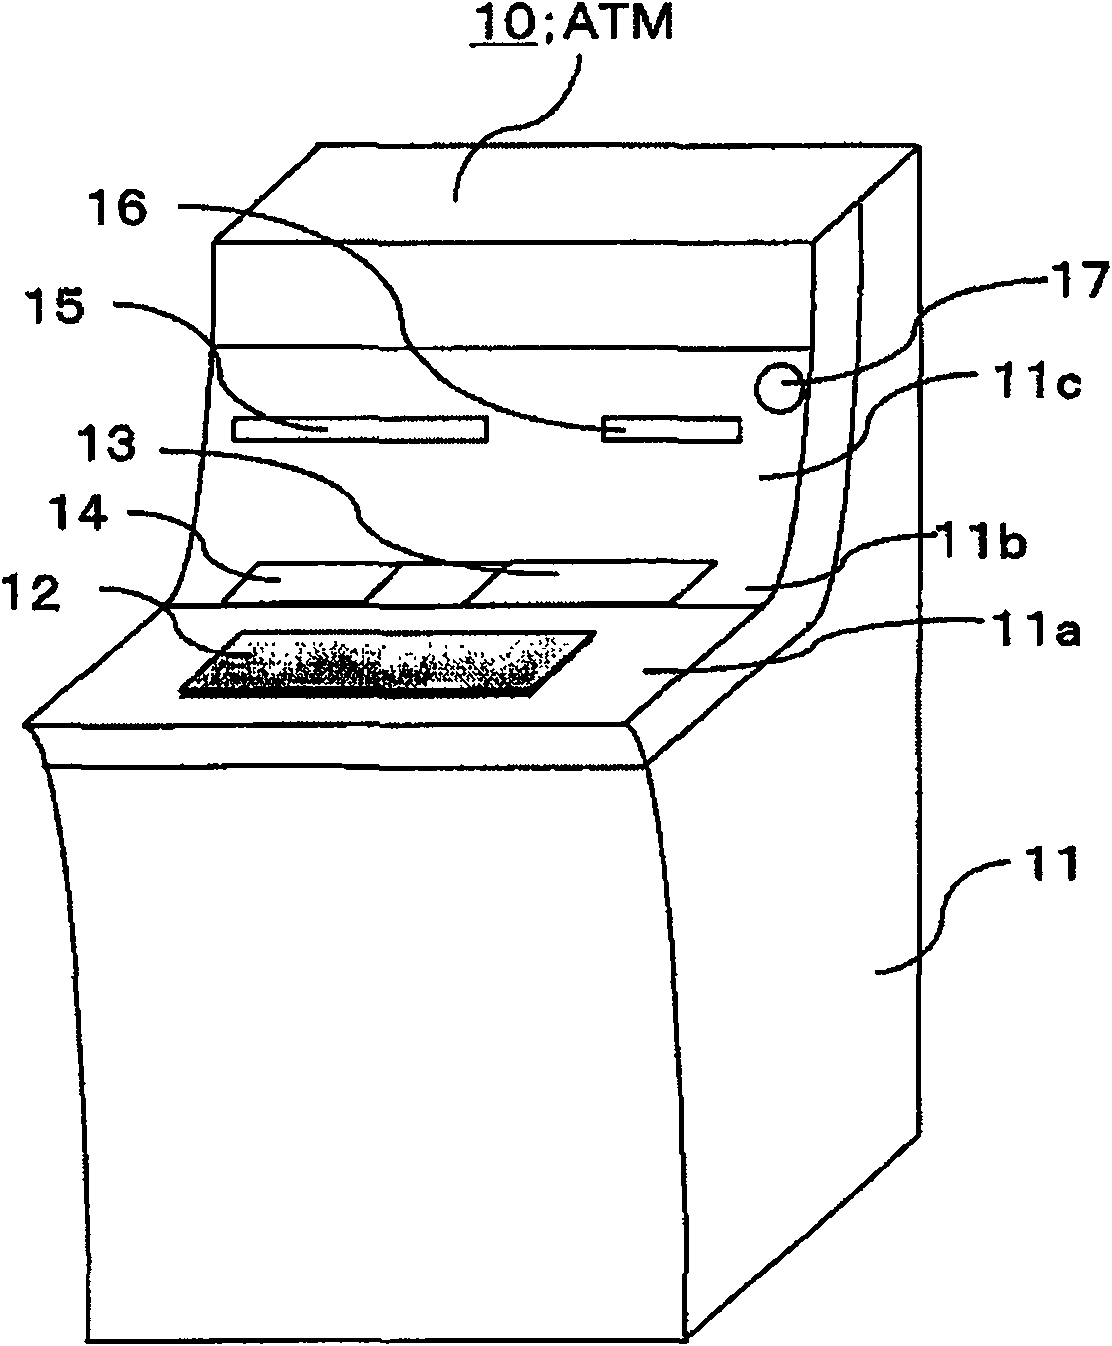 Paper money transaction device and a automatic transaction device with the same